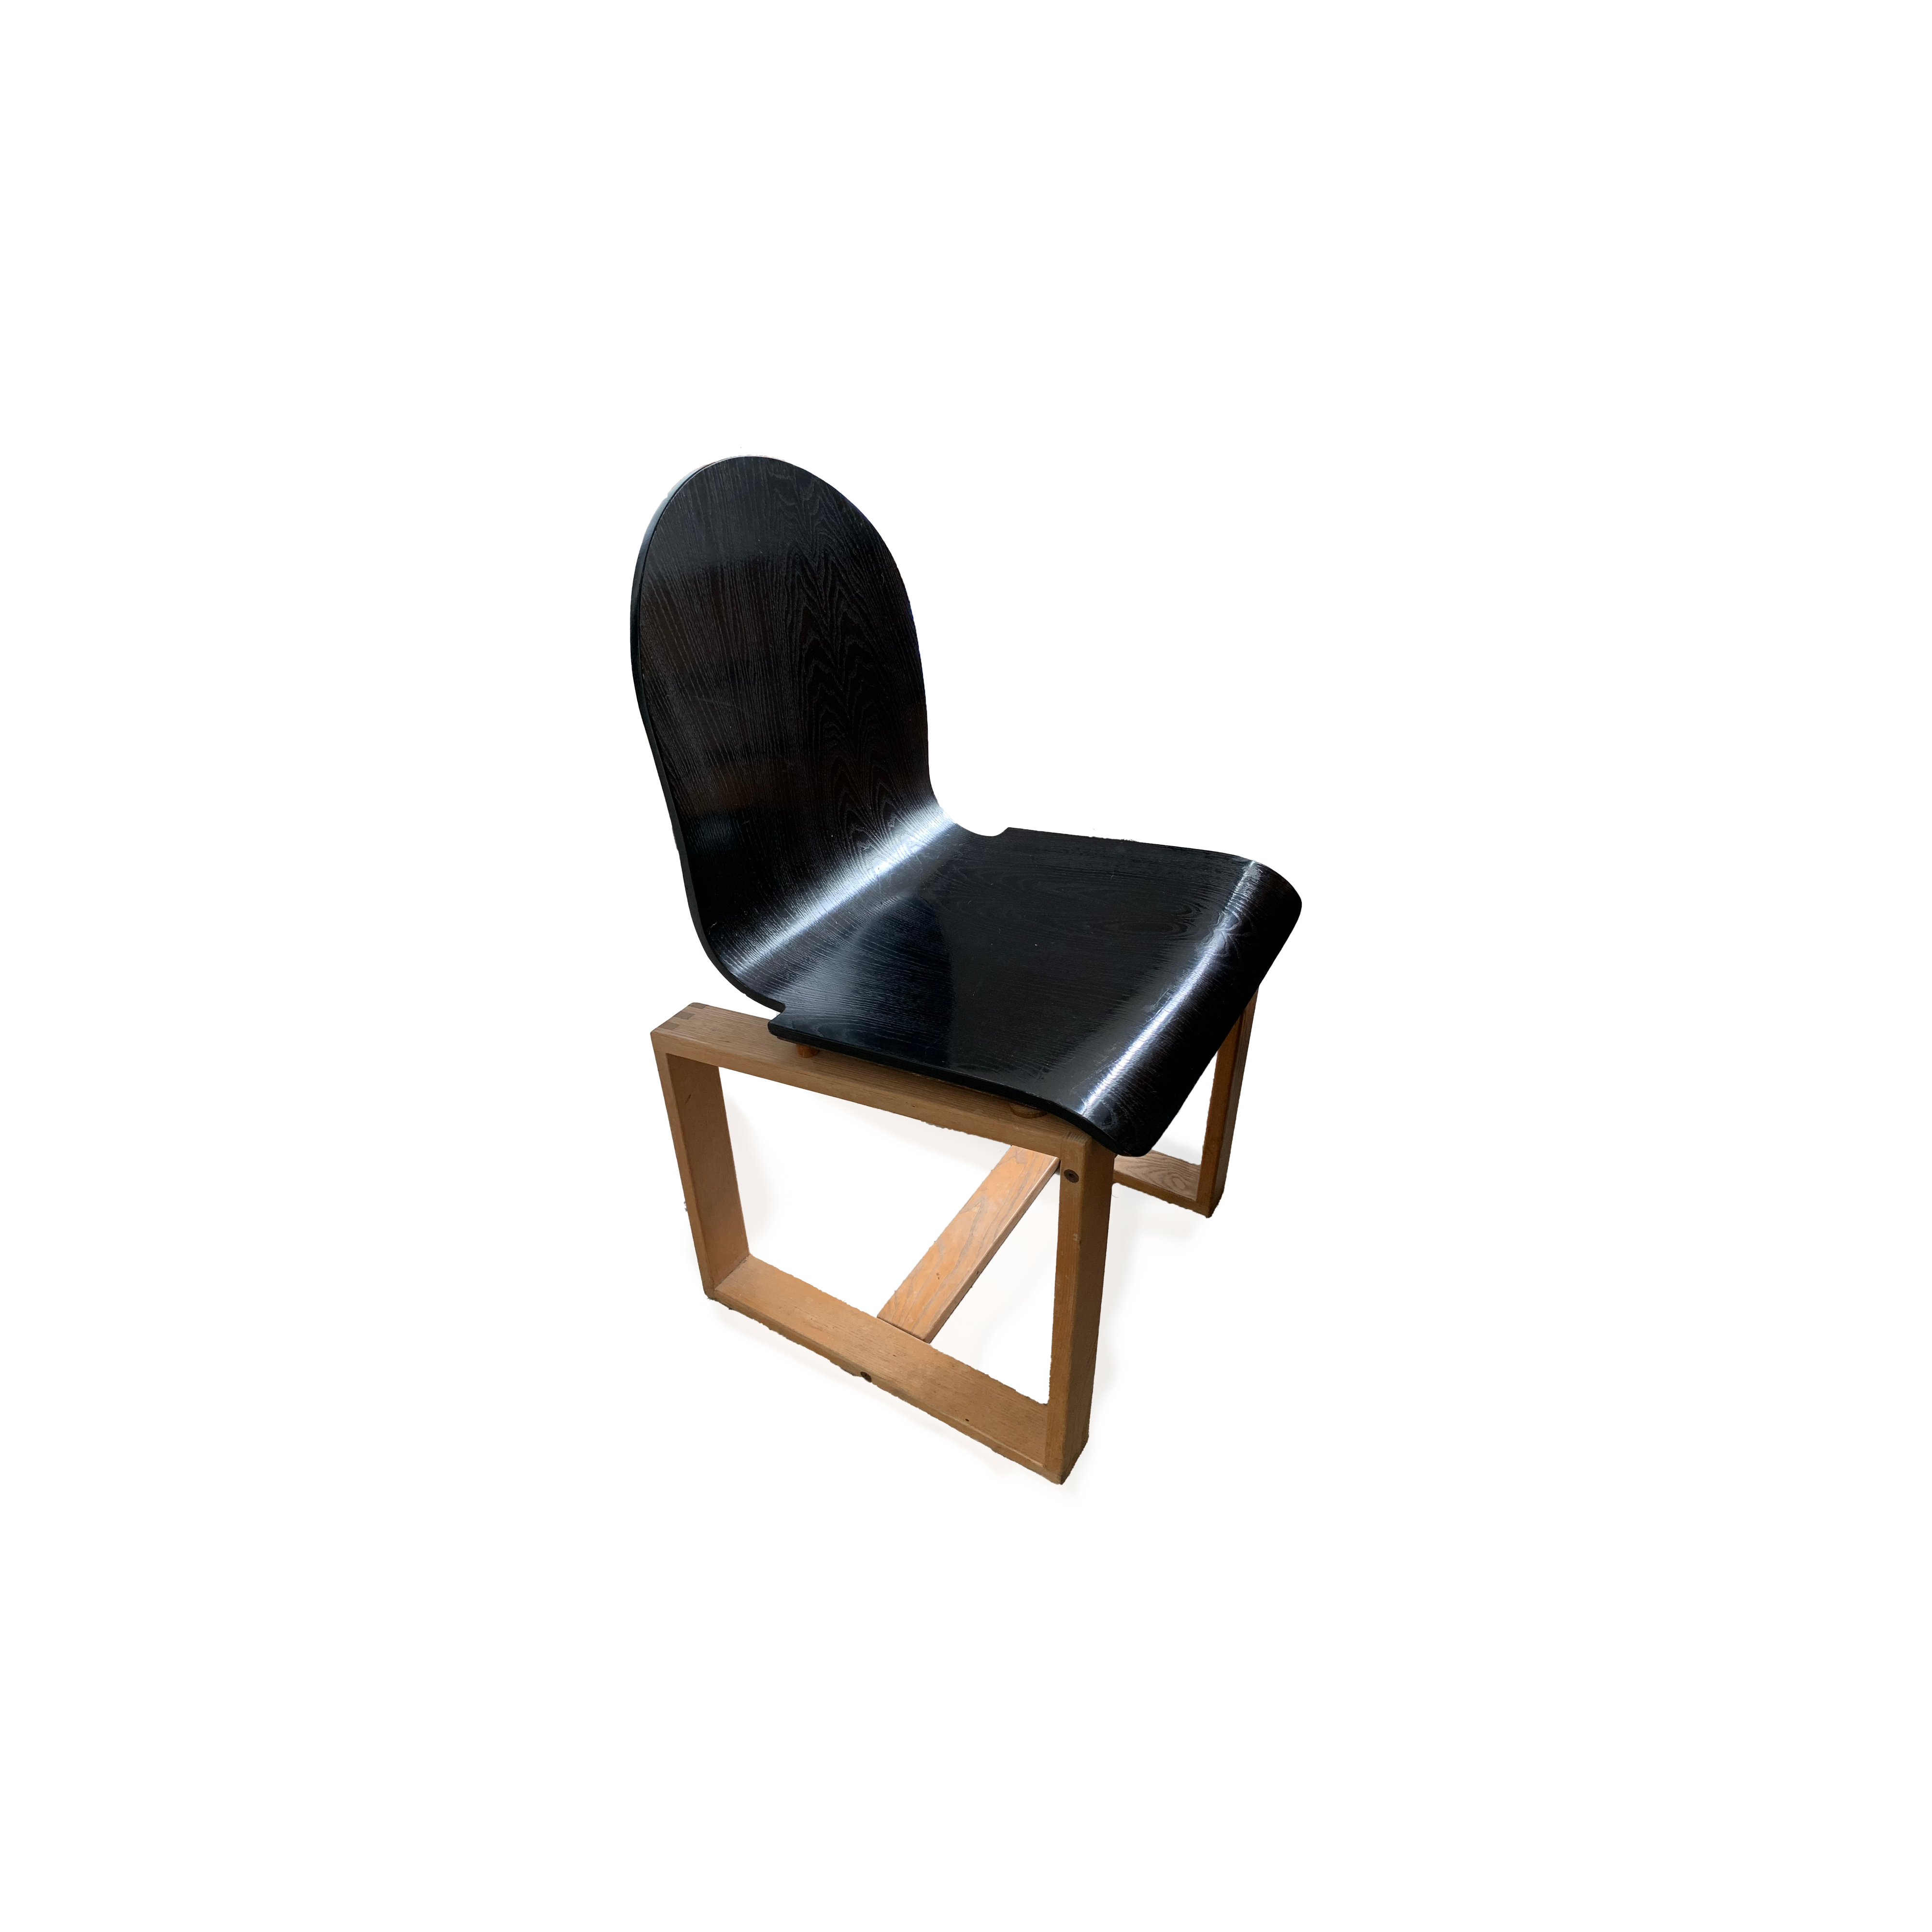 Mid-Century Italian Chair with Cubic Wood Structure and Curved Seat